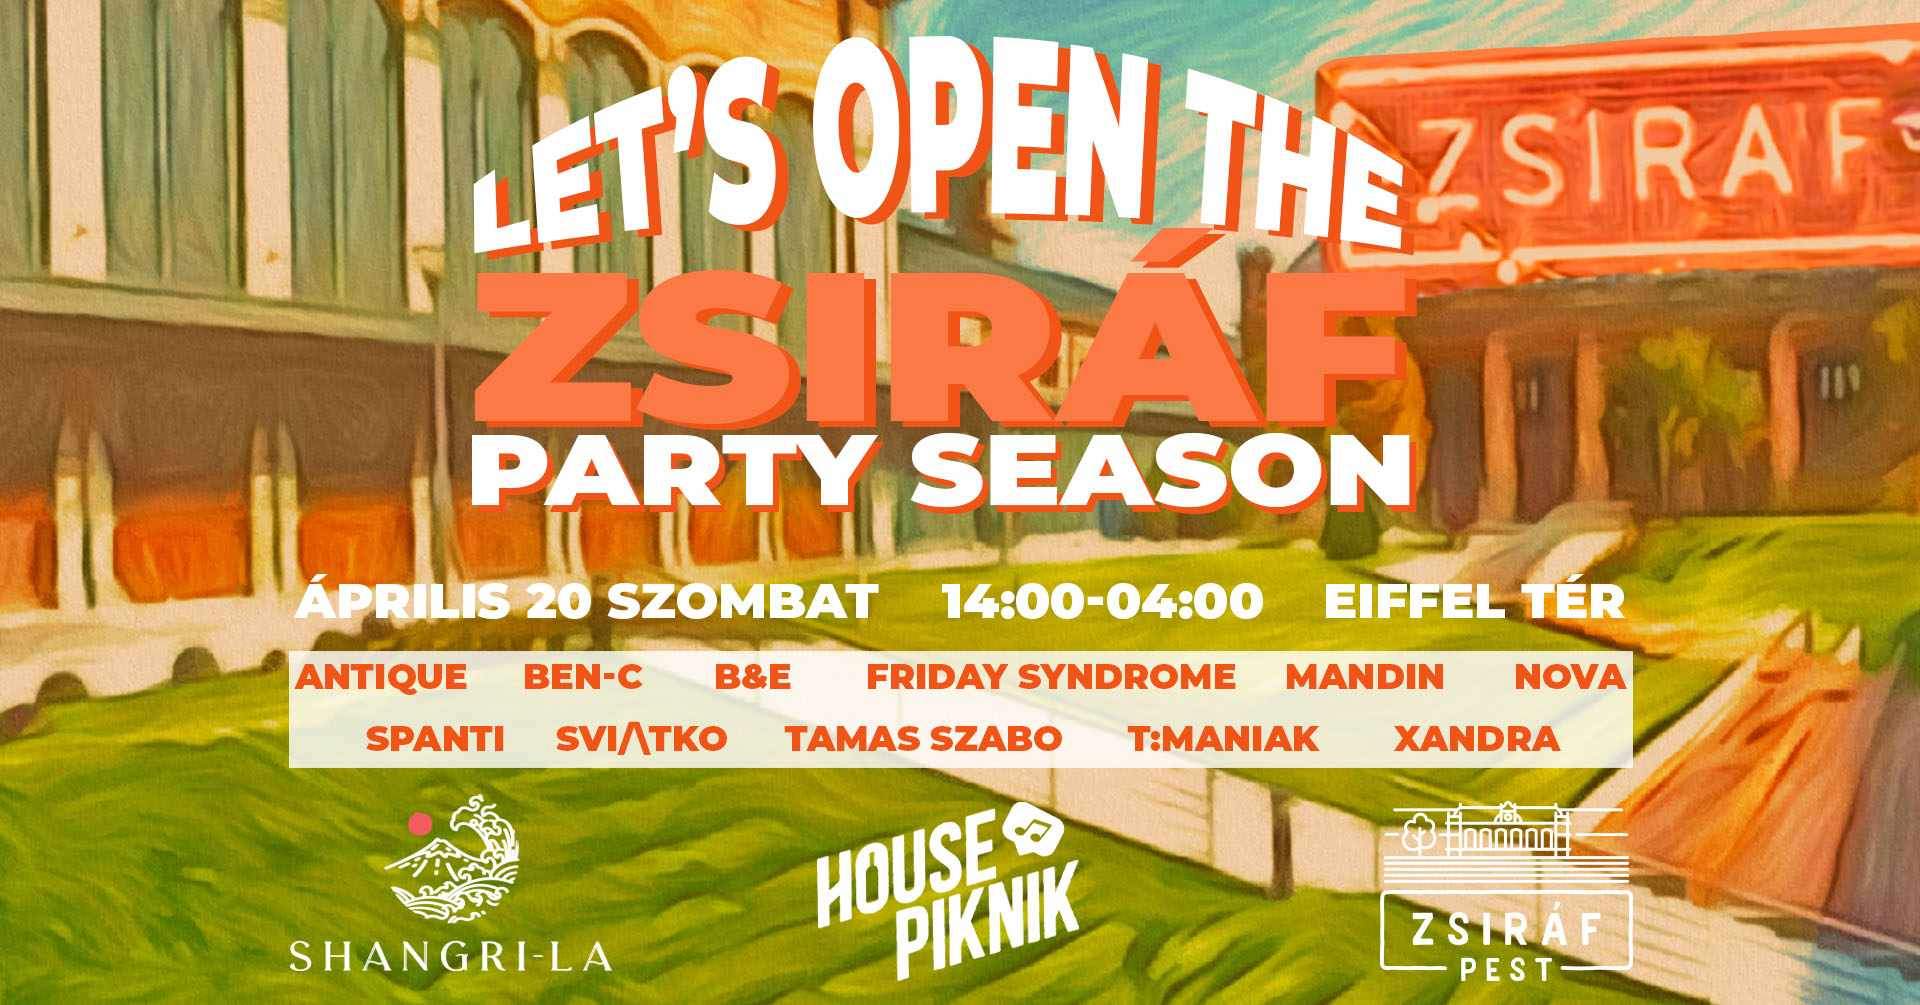 House Piknik - Let's Open The Zsiráf - FREE EVENT - フライヤー表